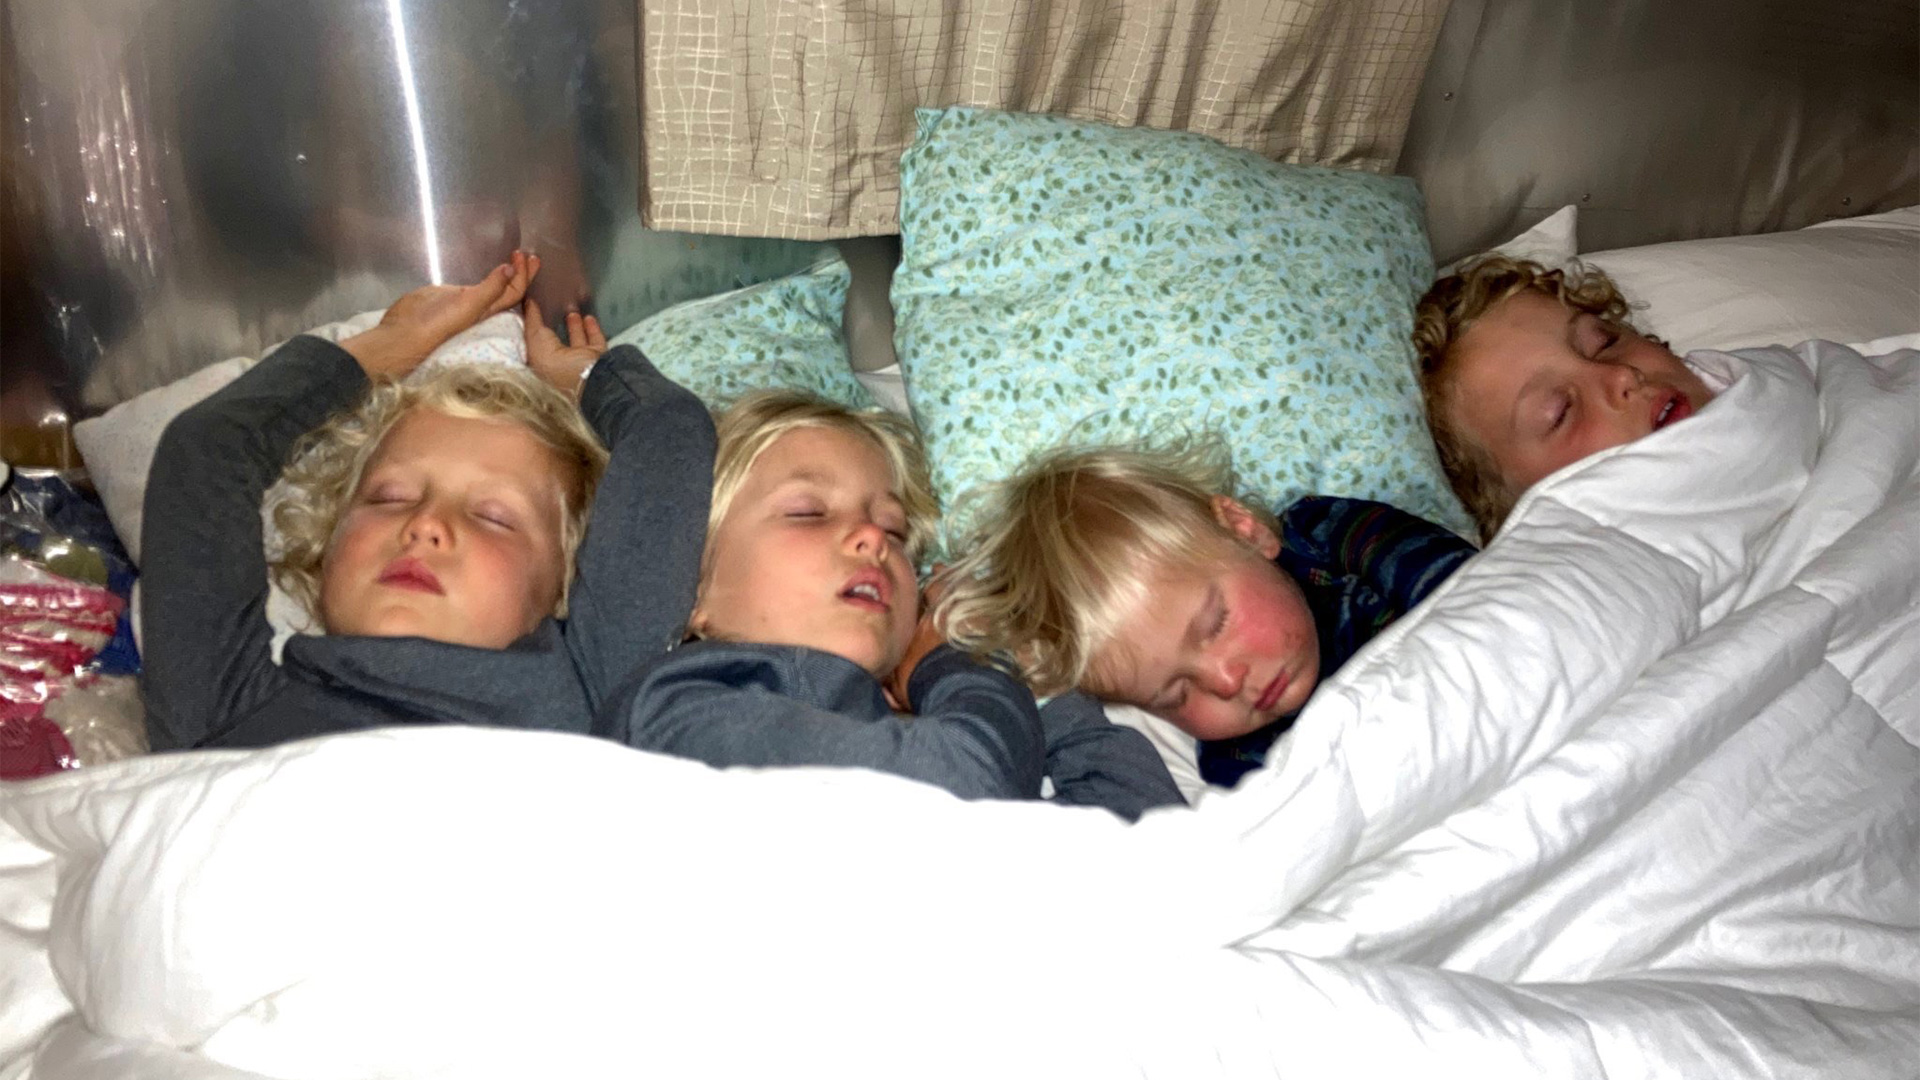 Four sibling campers sleeping in an Airstream travel trailer in the same bed.